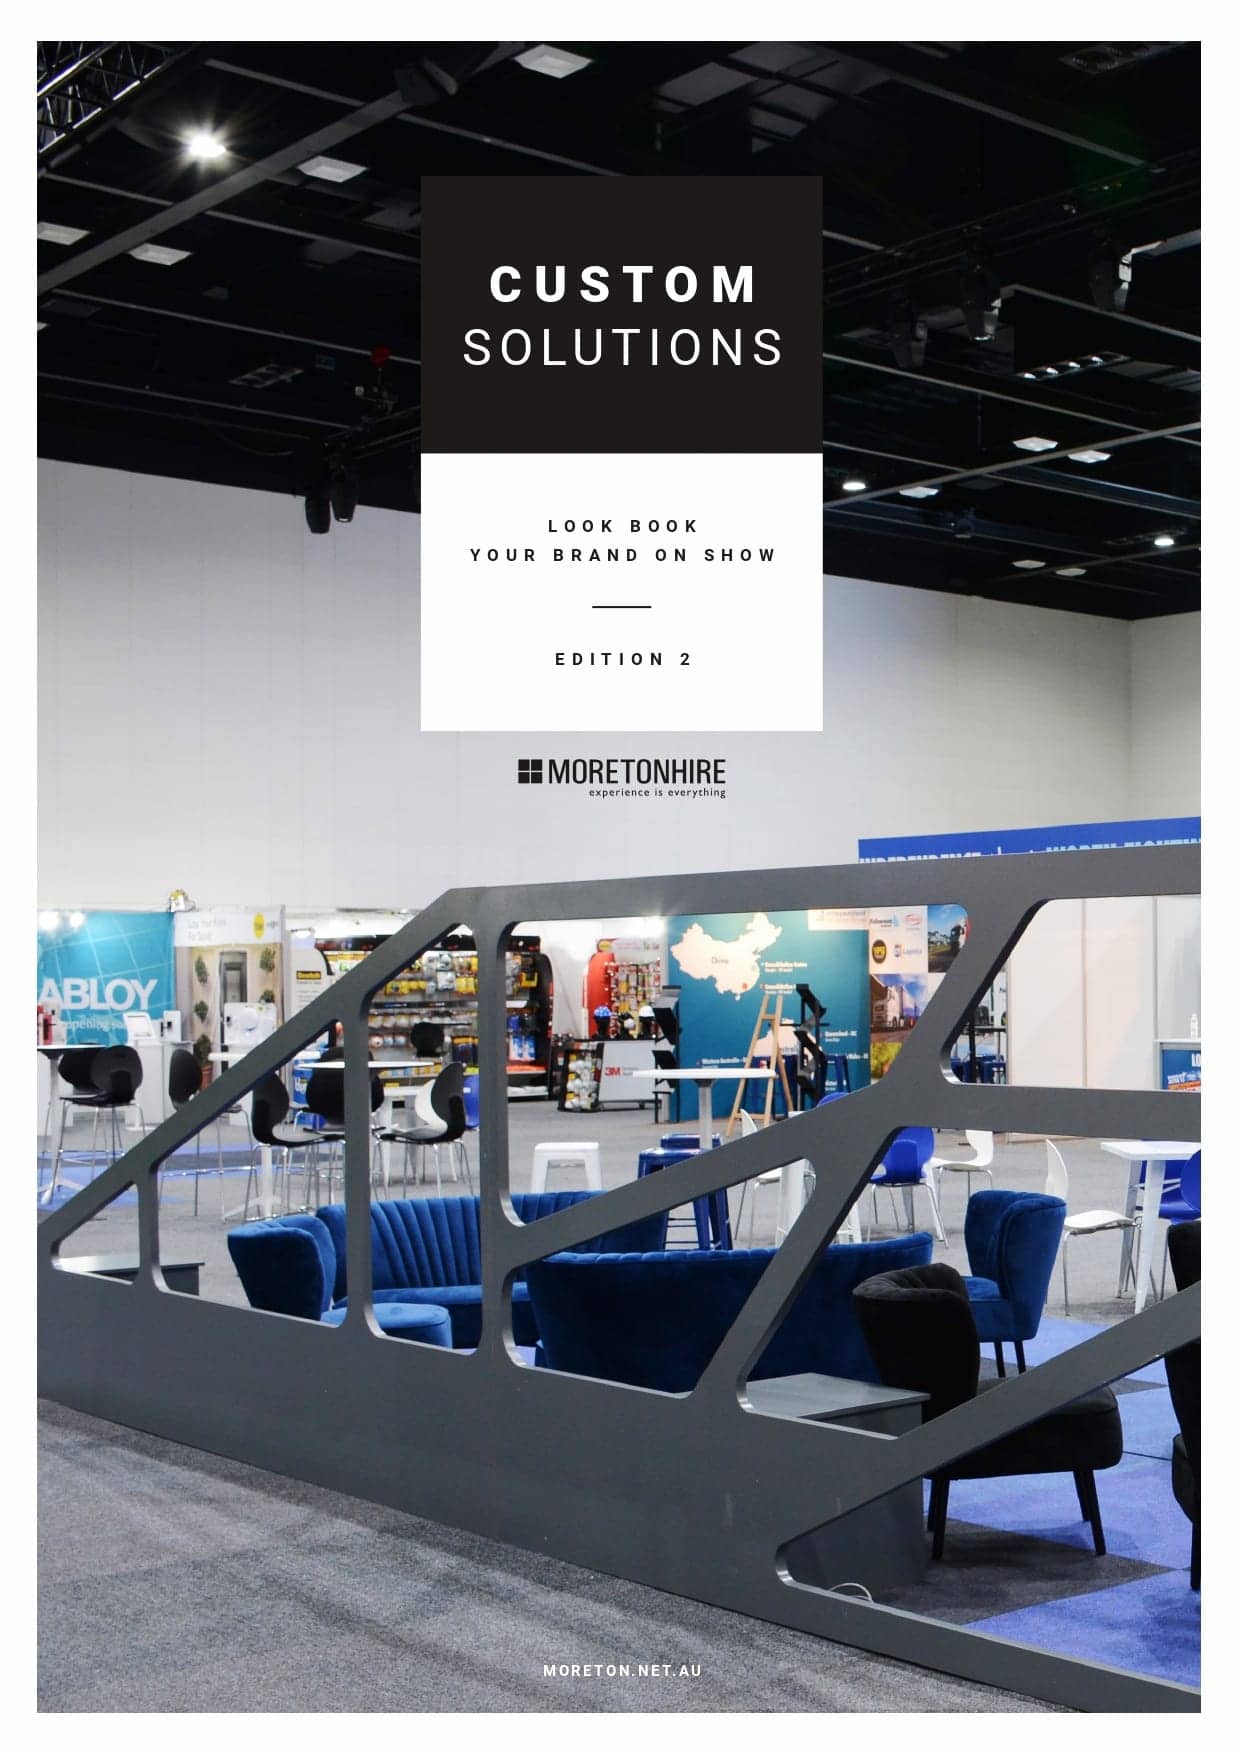 Custom Solutions look Book 2019 Final_HR_page 0001